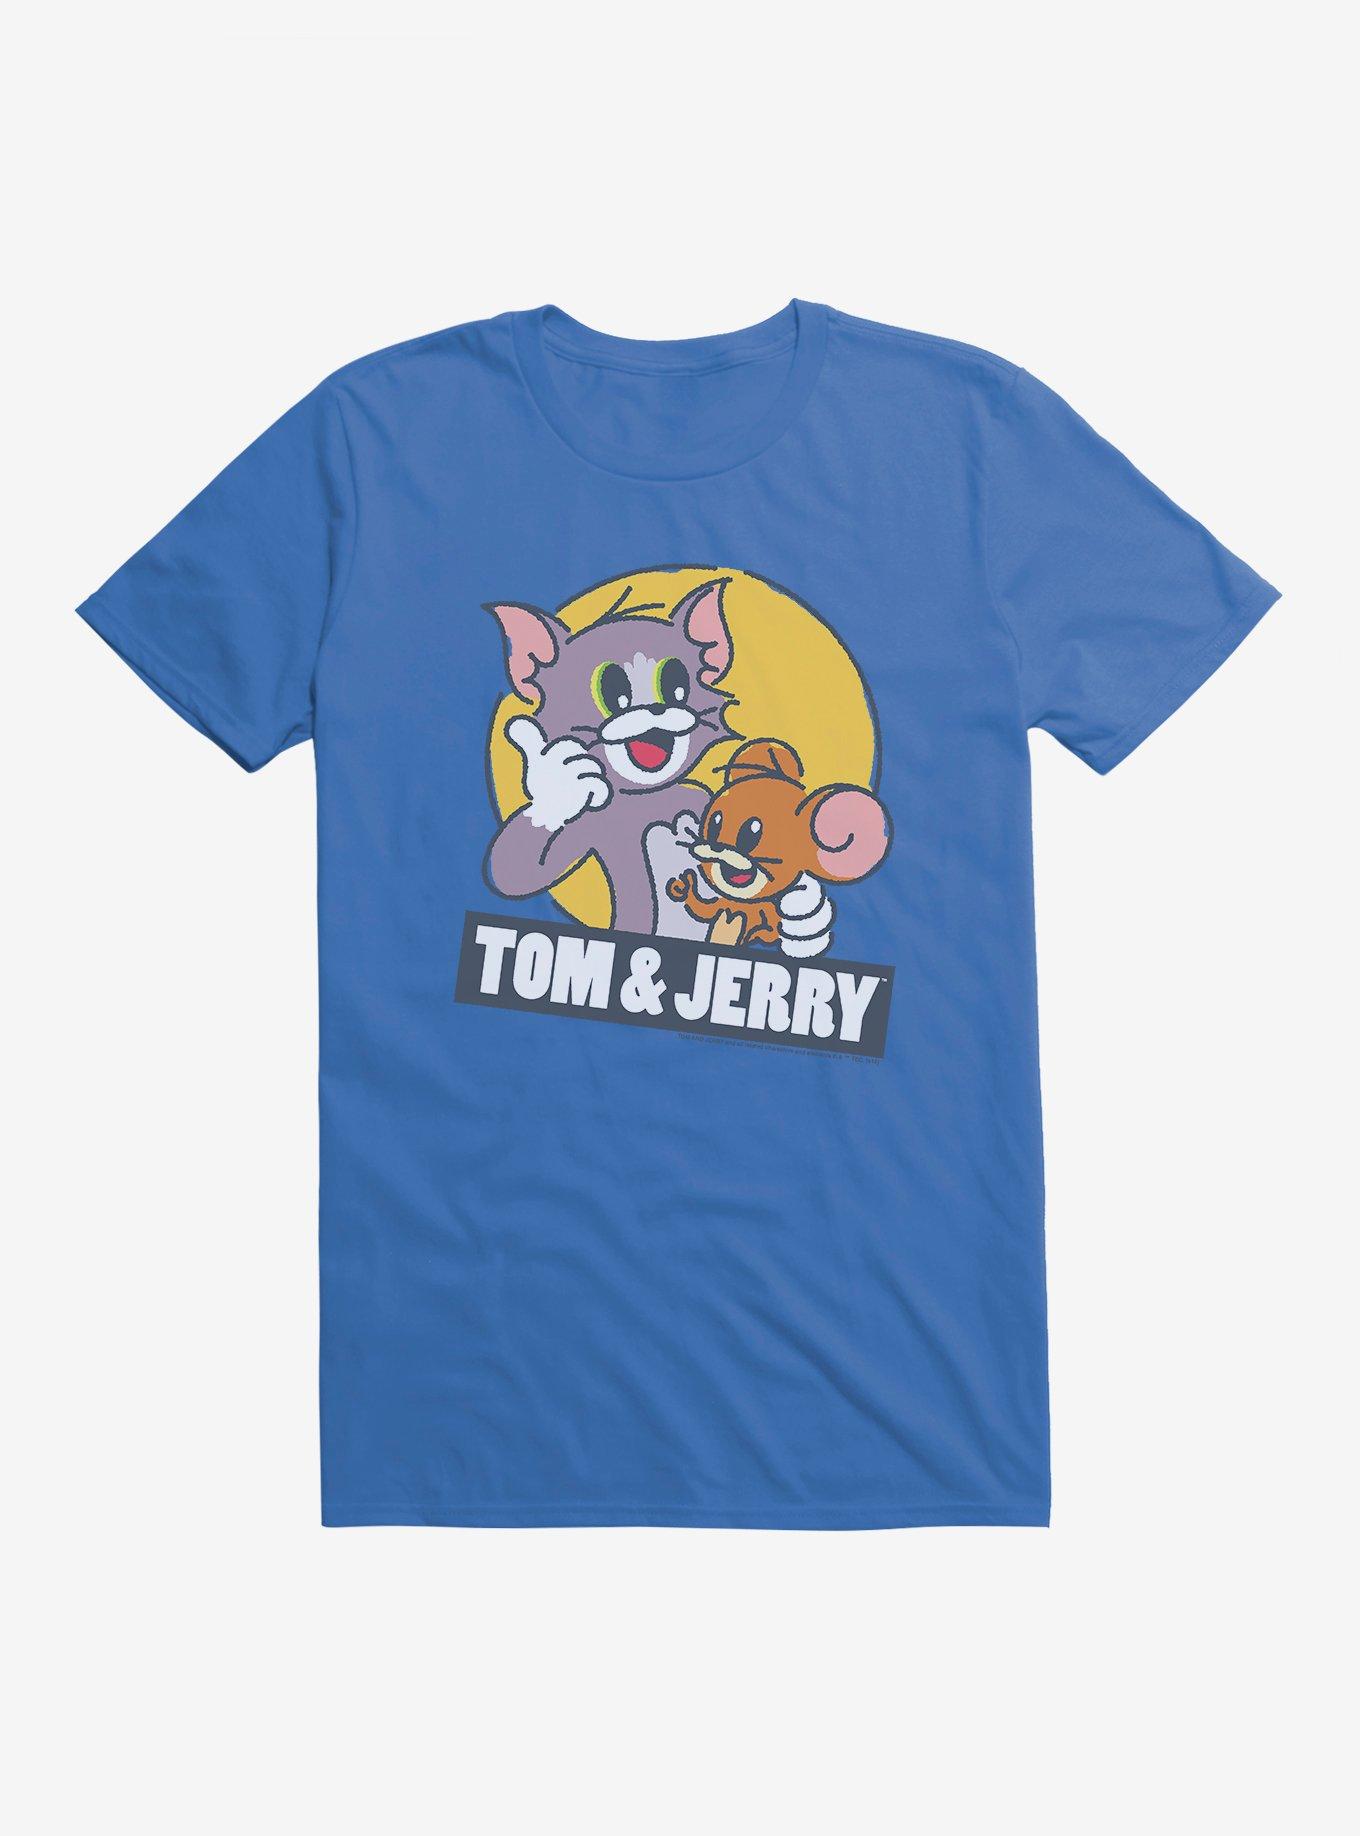 Tom and Jerry Duo Photo T-Shirt, ROYAL BLUE, hi-res